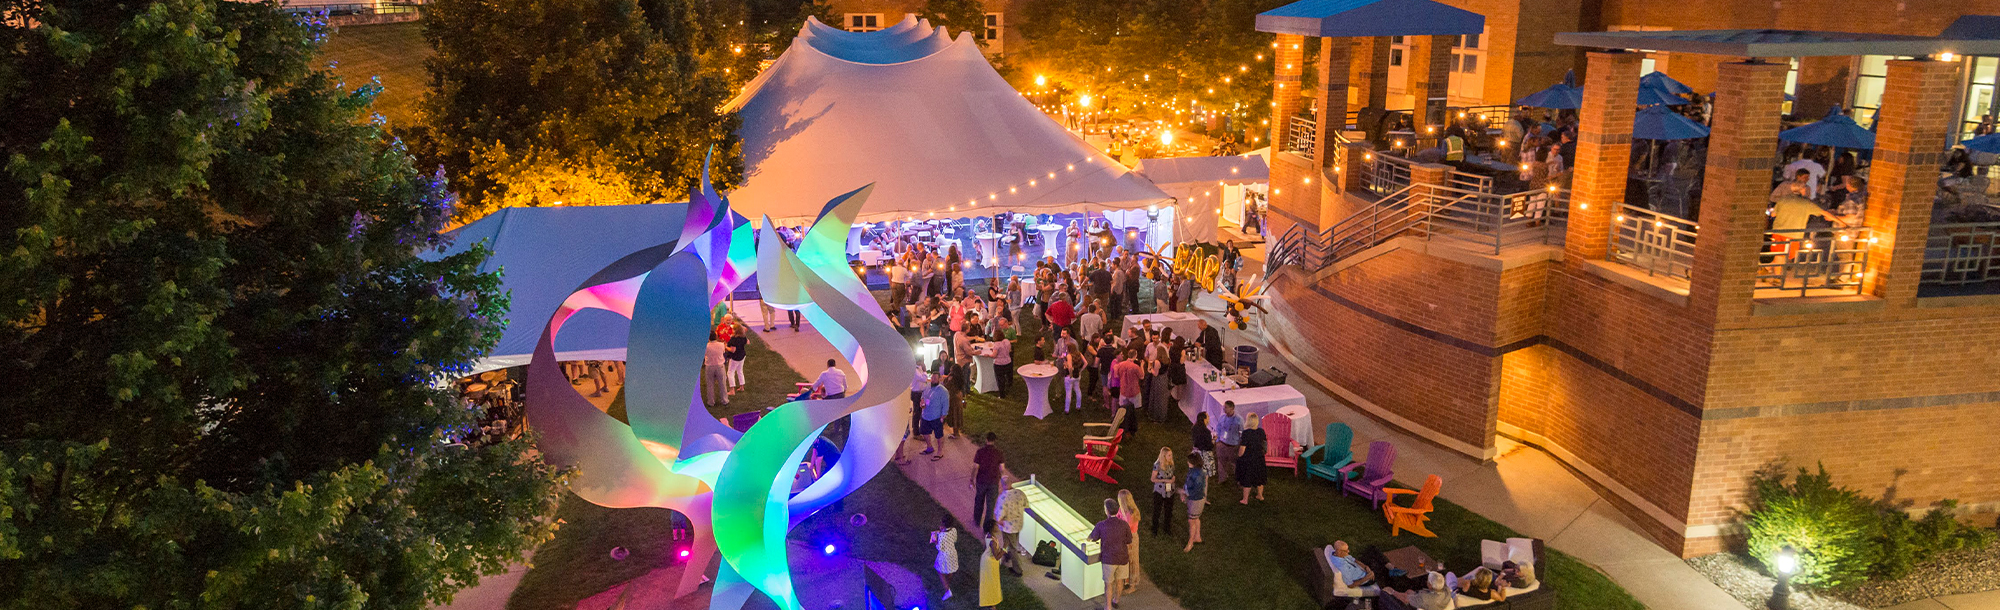 Aerial view of event at night on campus